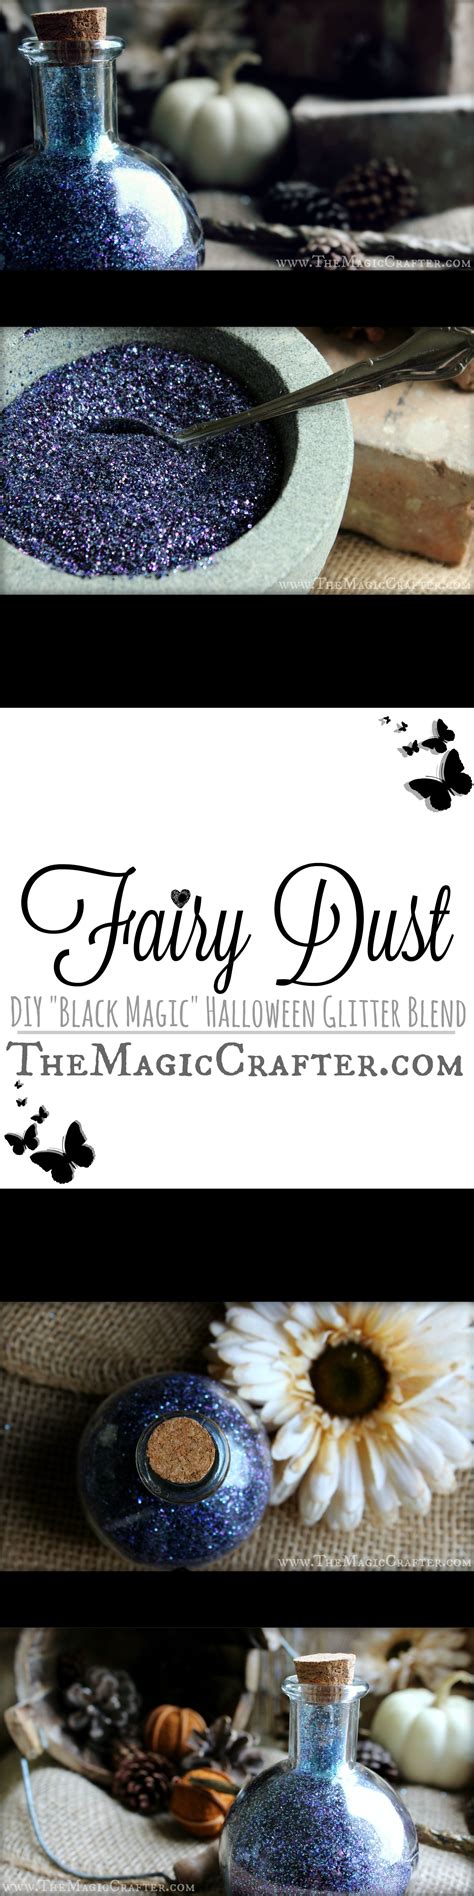 Magic Potions ♥ Diy ♥ How To Make Fairy Dust ♥ Halloween Crafts